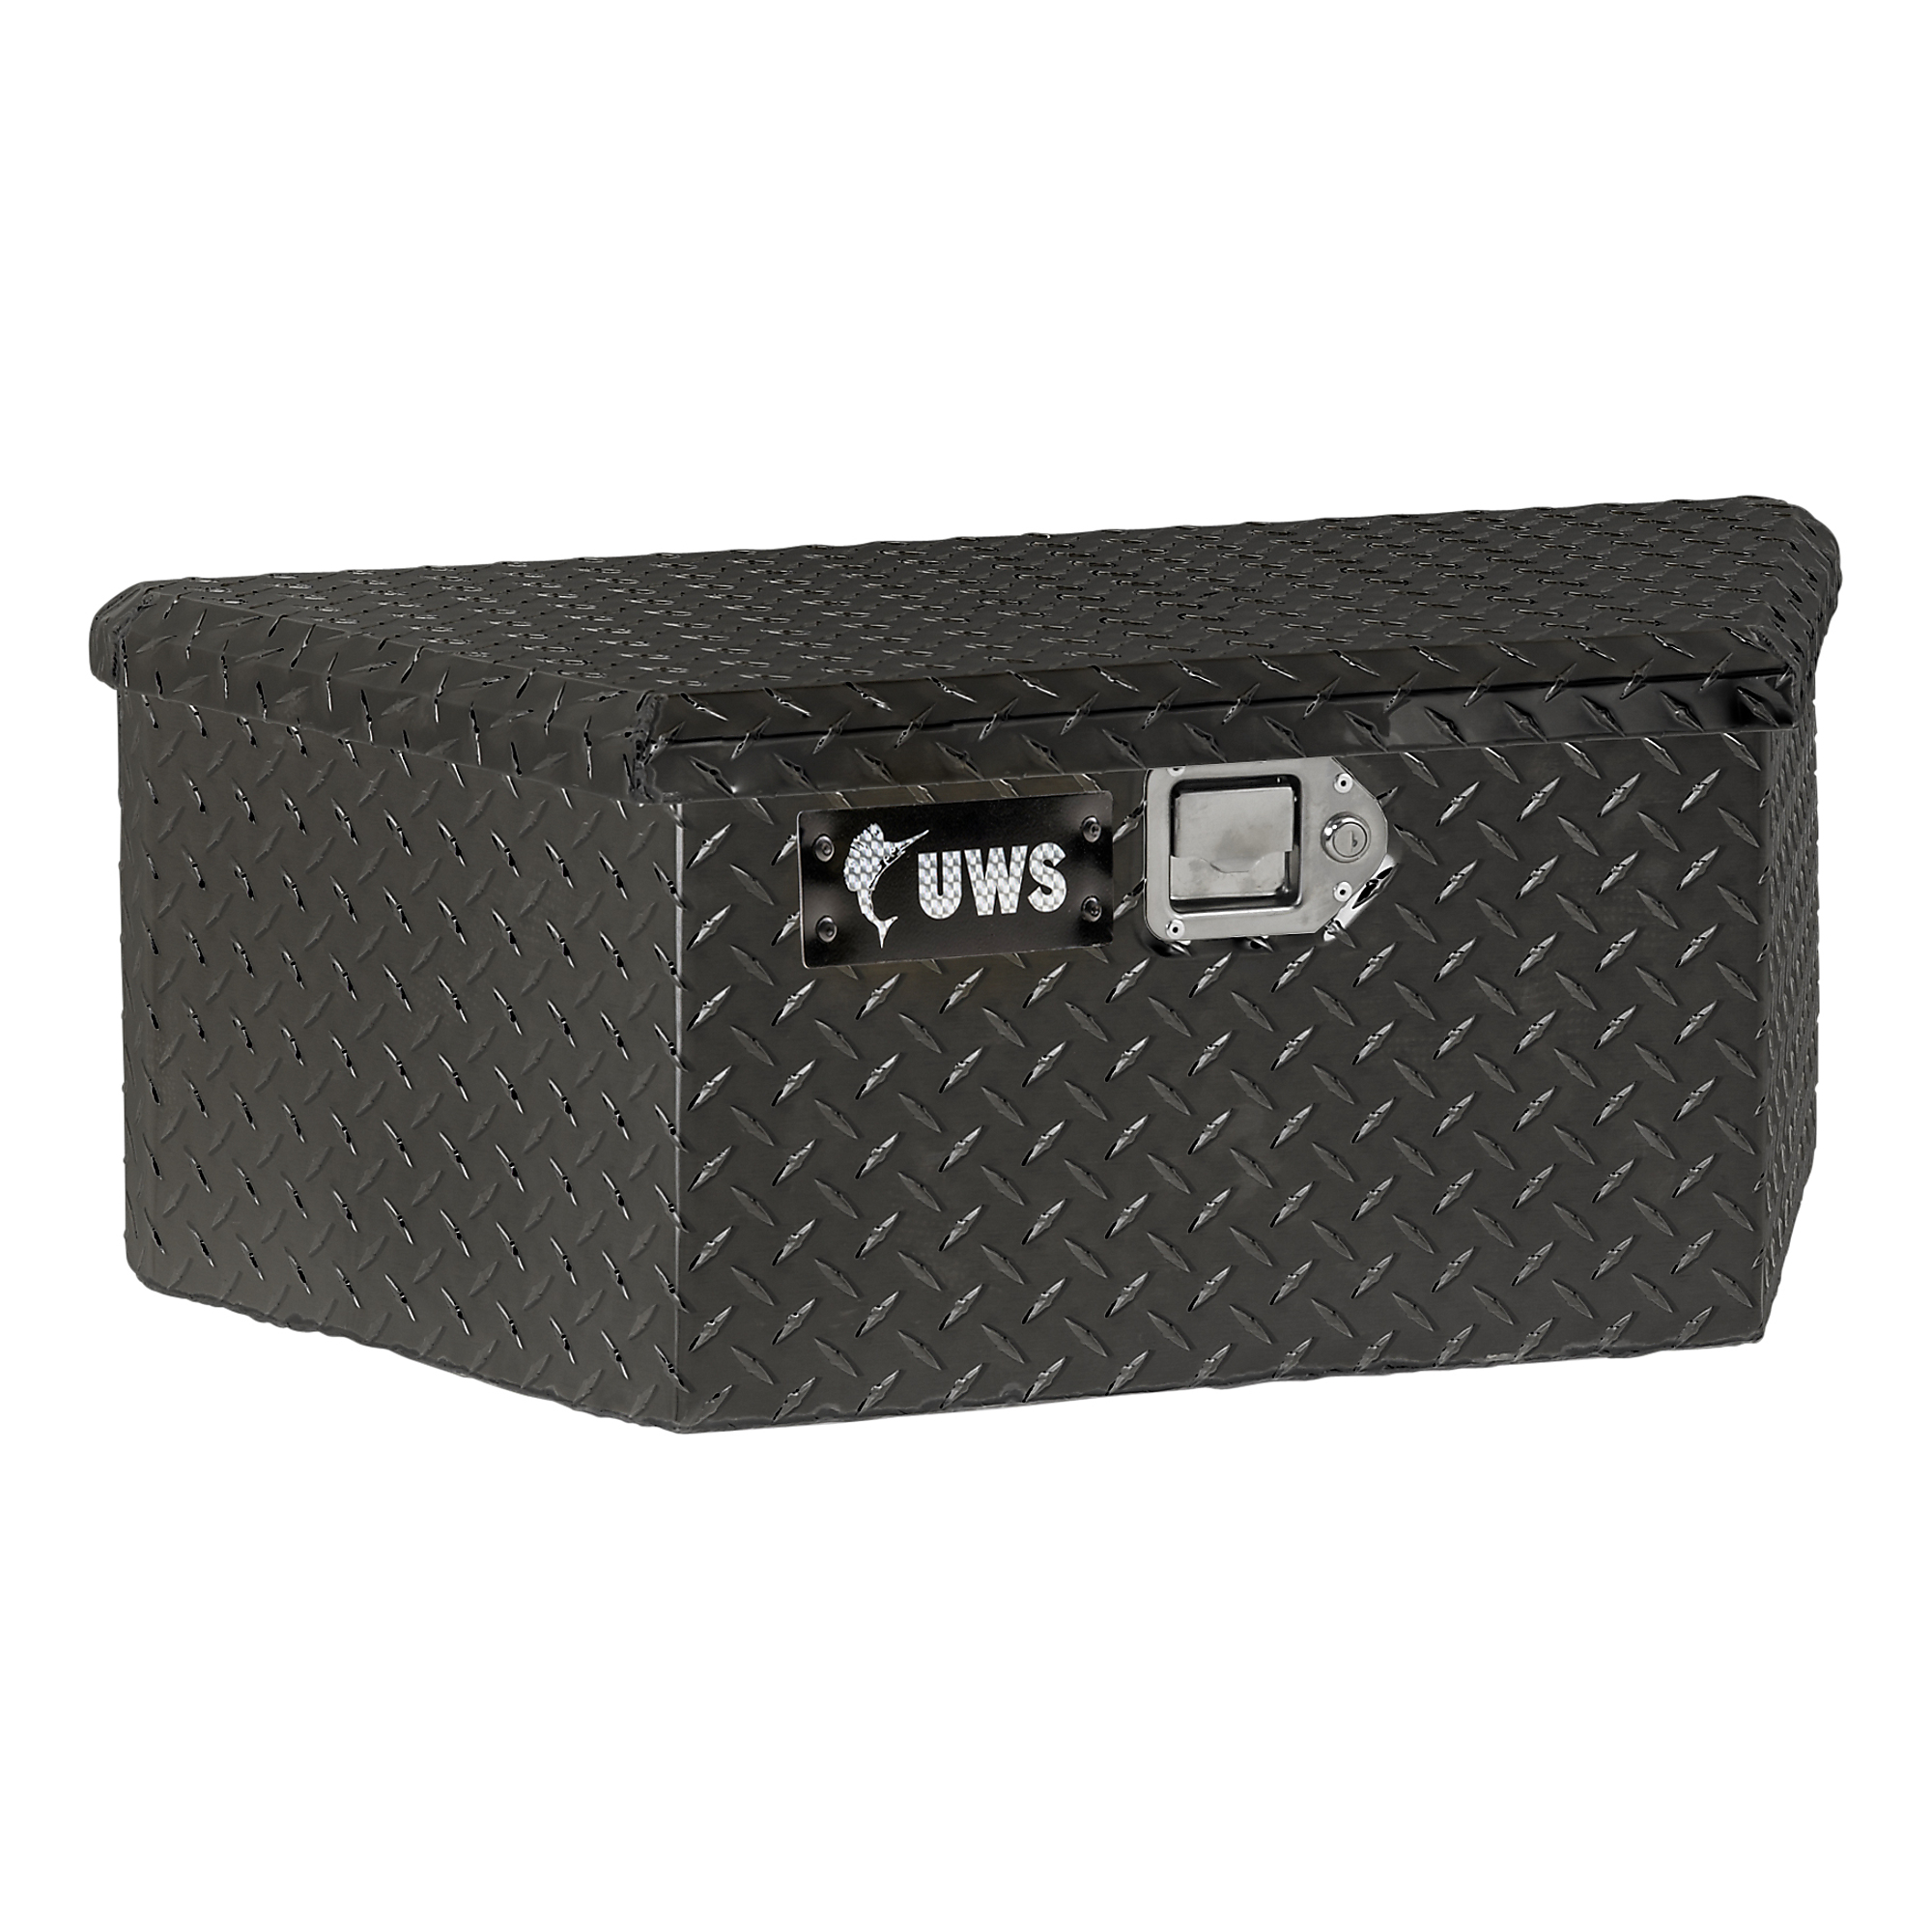 UWS, 34Inch Trailer Tongue Box with Low Profile, Width 34.5 in, Material Aluminum, Color Finish Gloss Black, Model EC20422